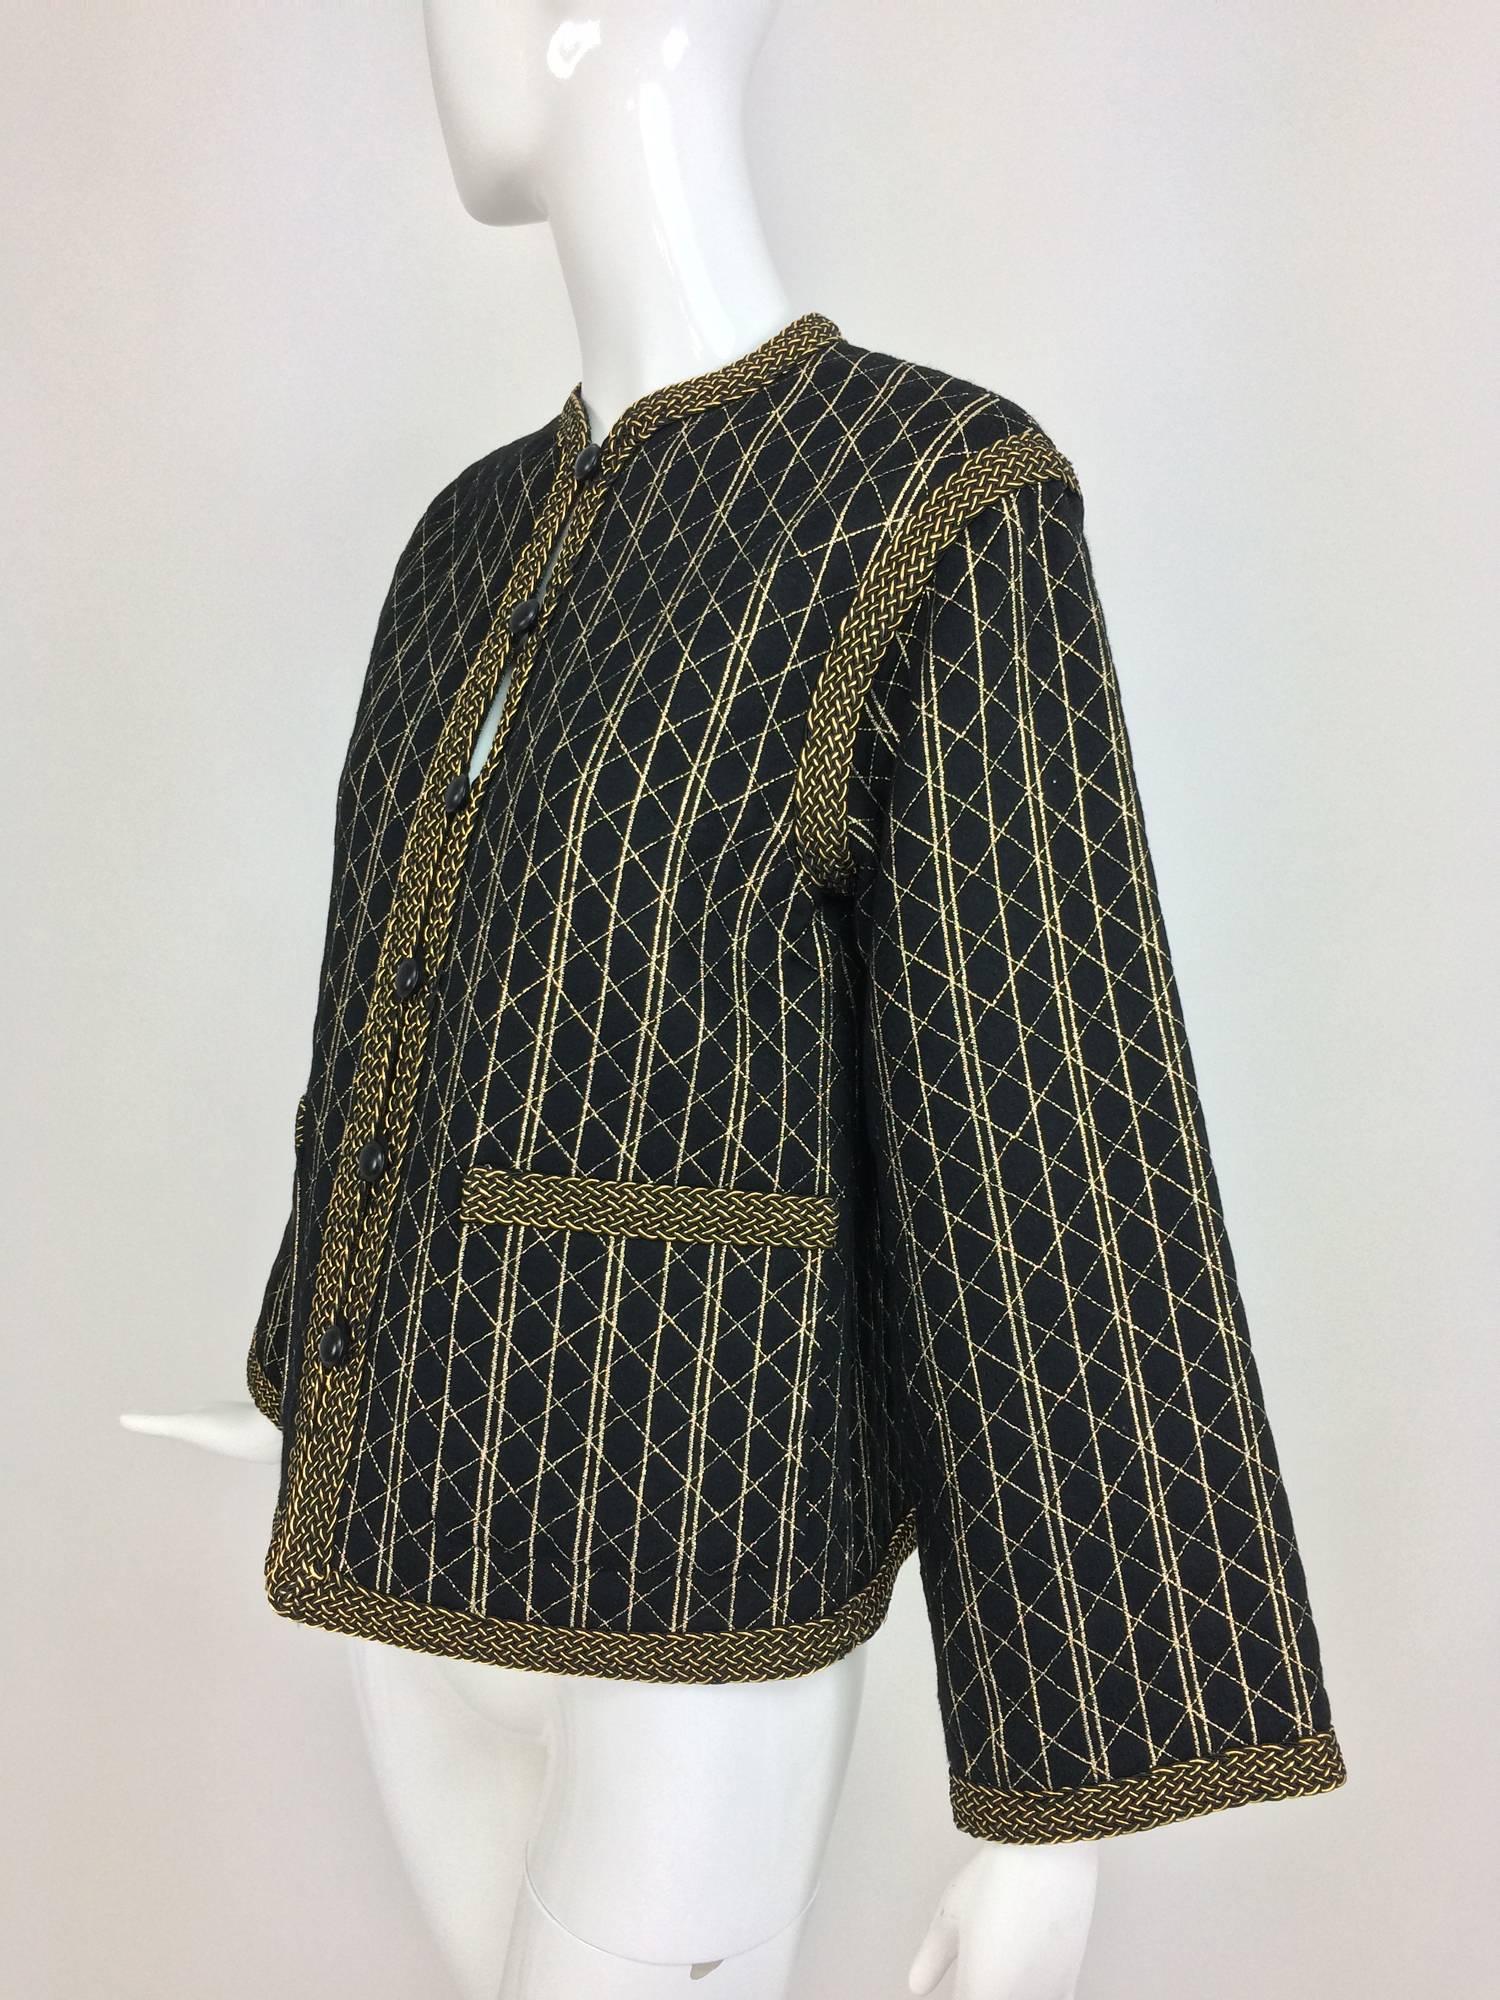 Vintage Yves Saint Laurent black & gold metallic stripe jacket 1970s...Round neck jacket with long sleeves, facings, shoulder seams and pocket tops are trimmed with braided gold metallic cord...The jacket closes at the front with button and